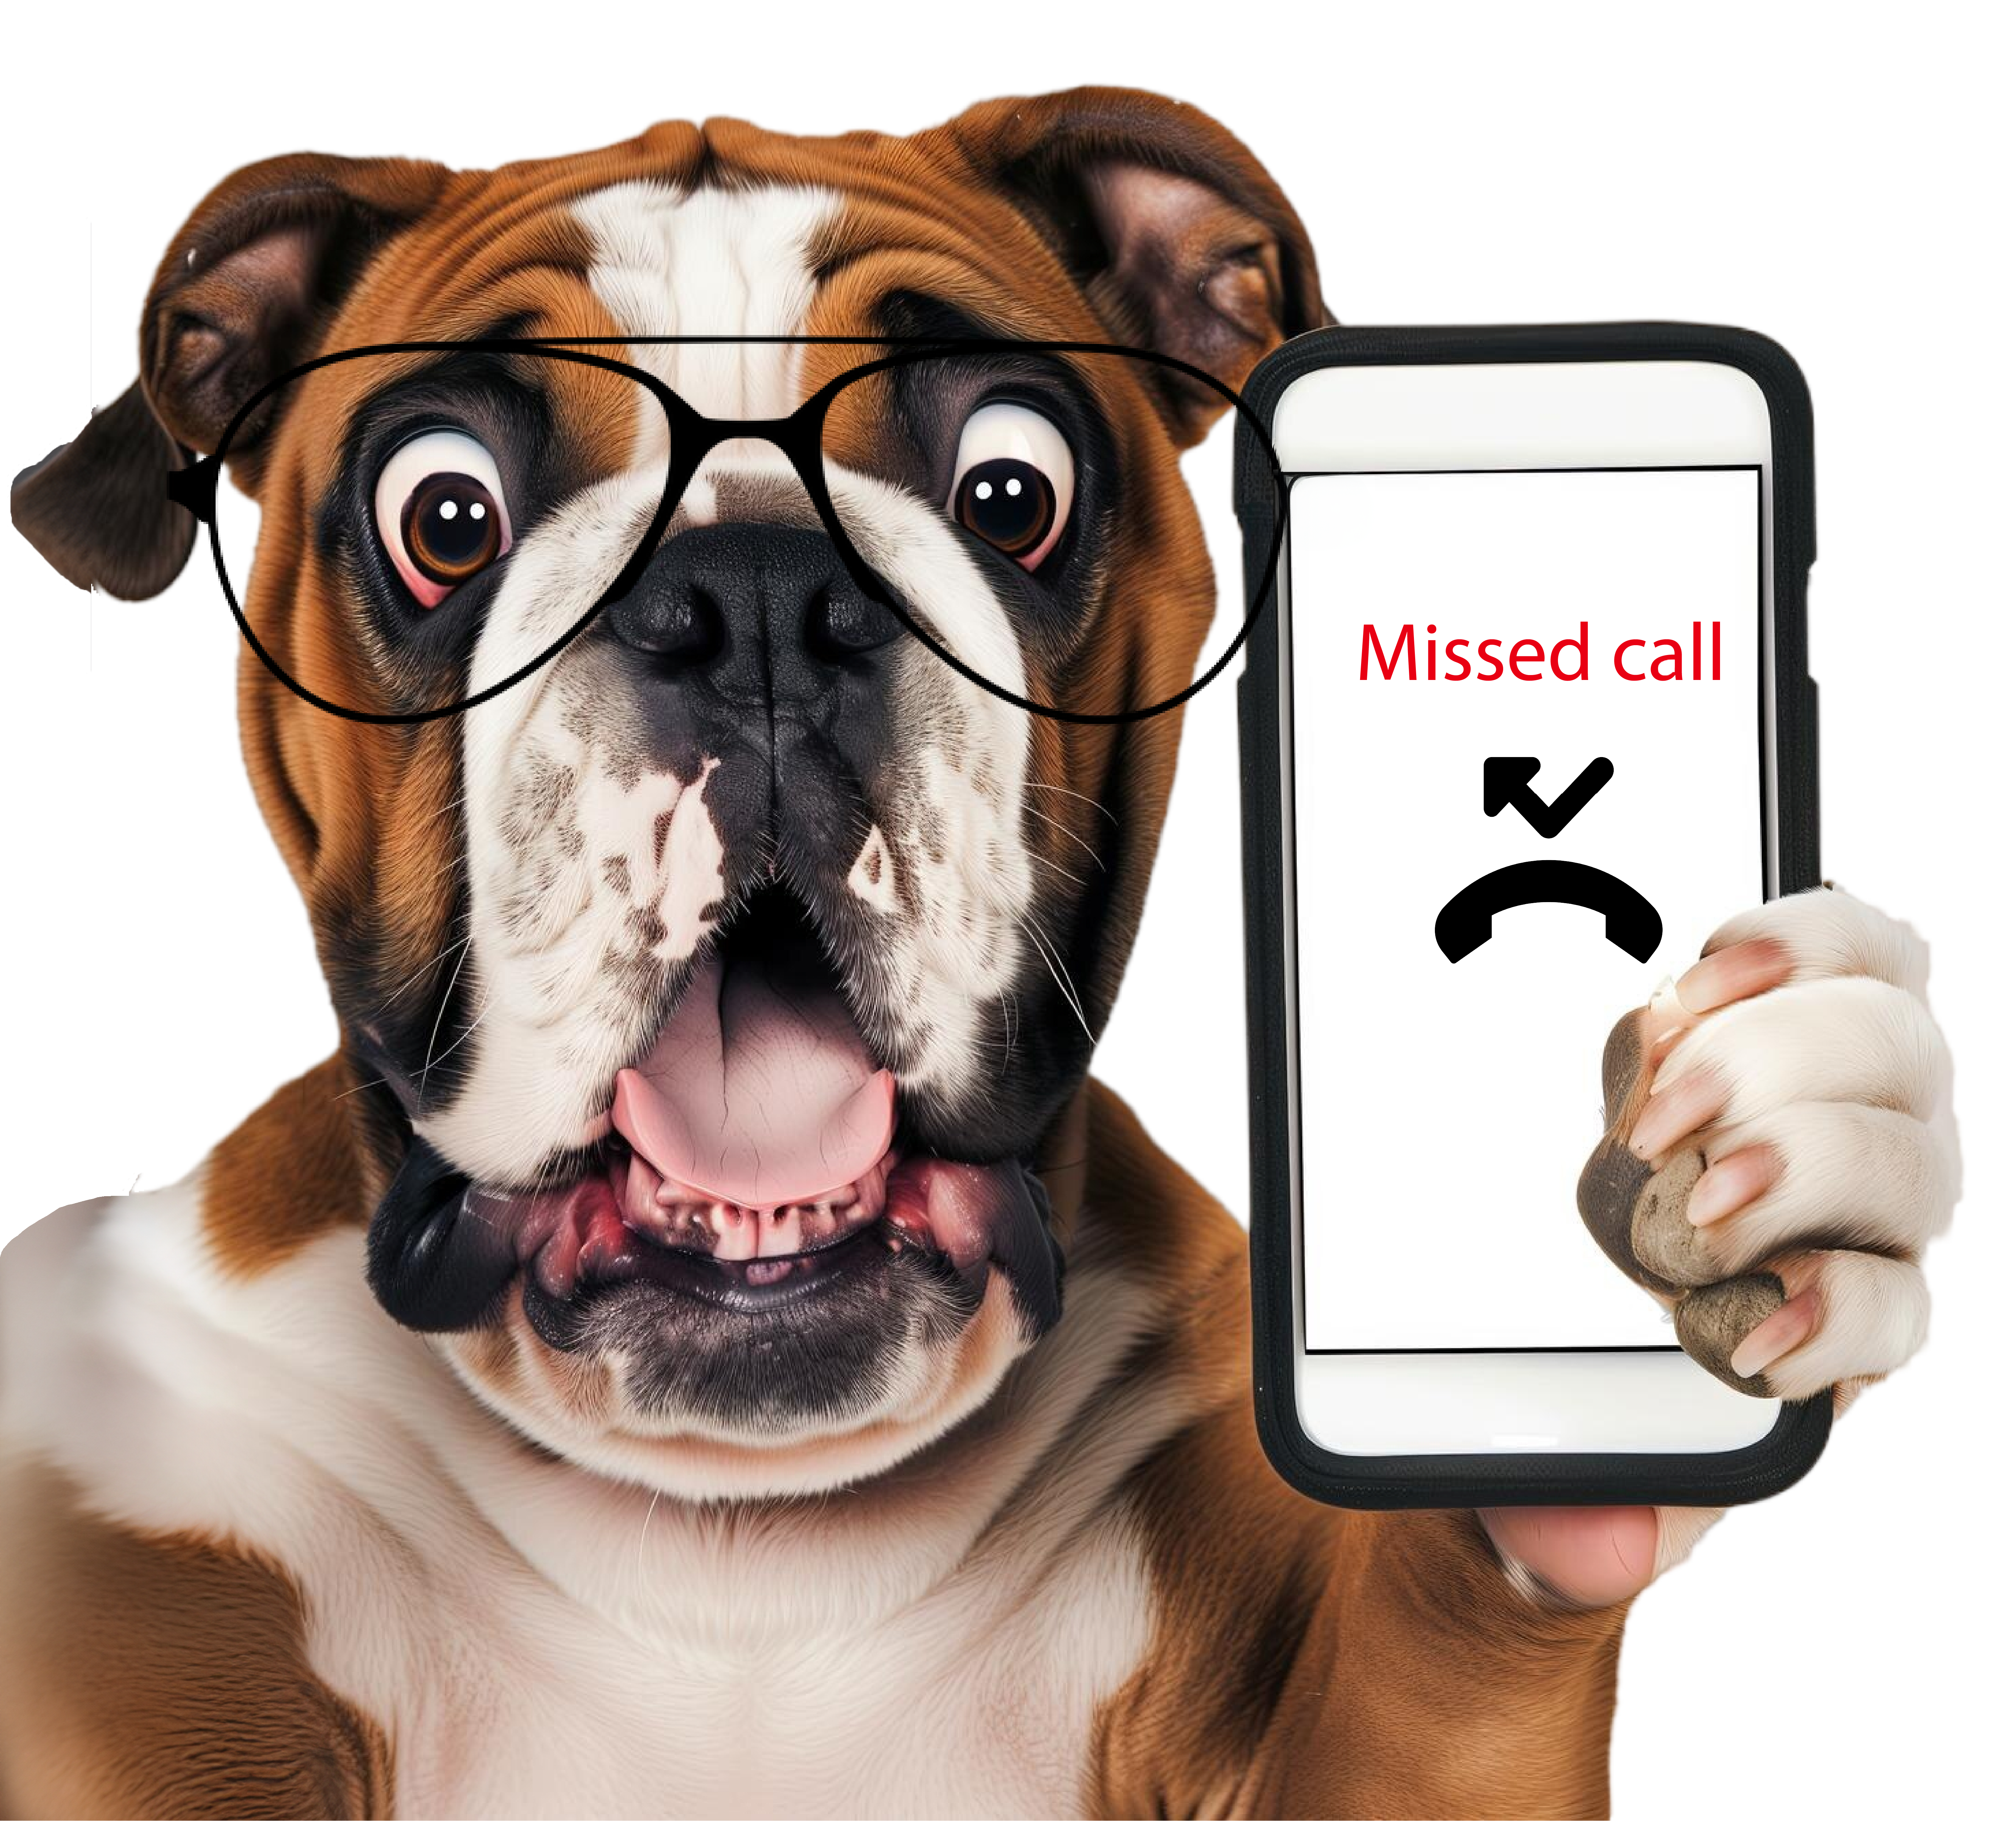 Dog holding a phone which is showing a missed call.